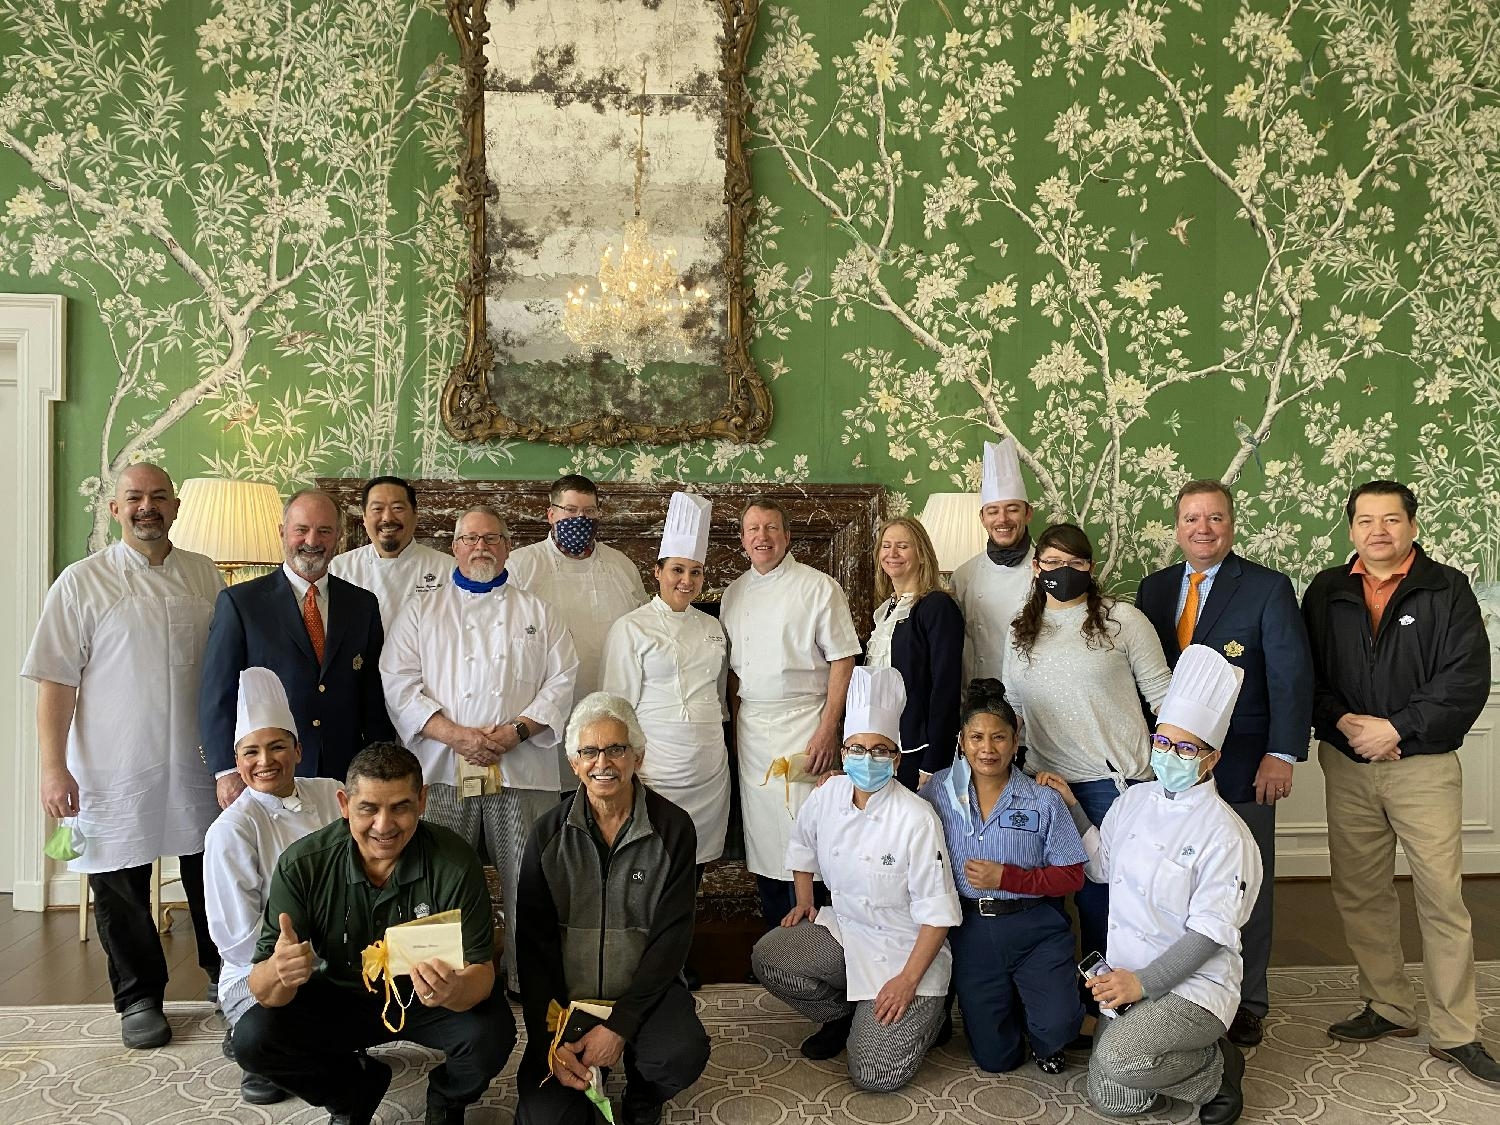 Members of our Culinary team receiving their 2020 tenure awards